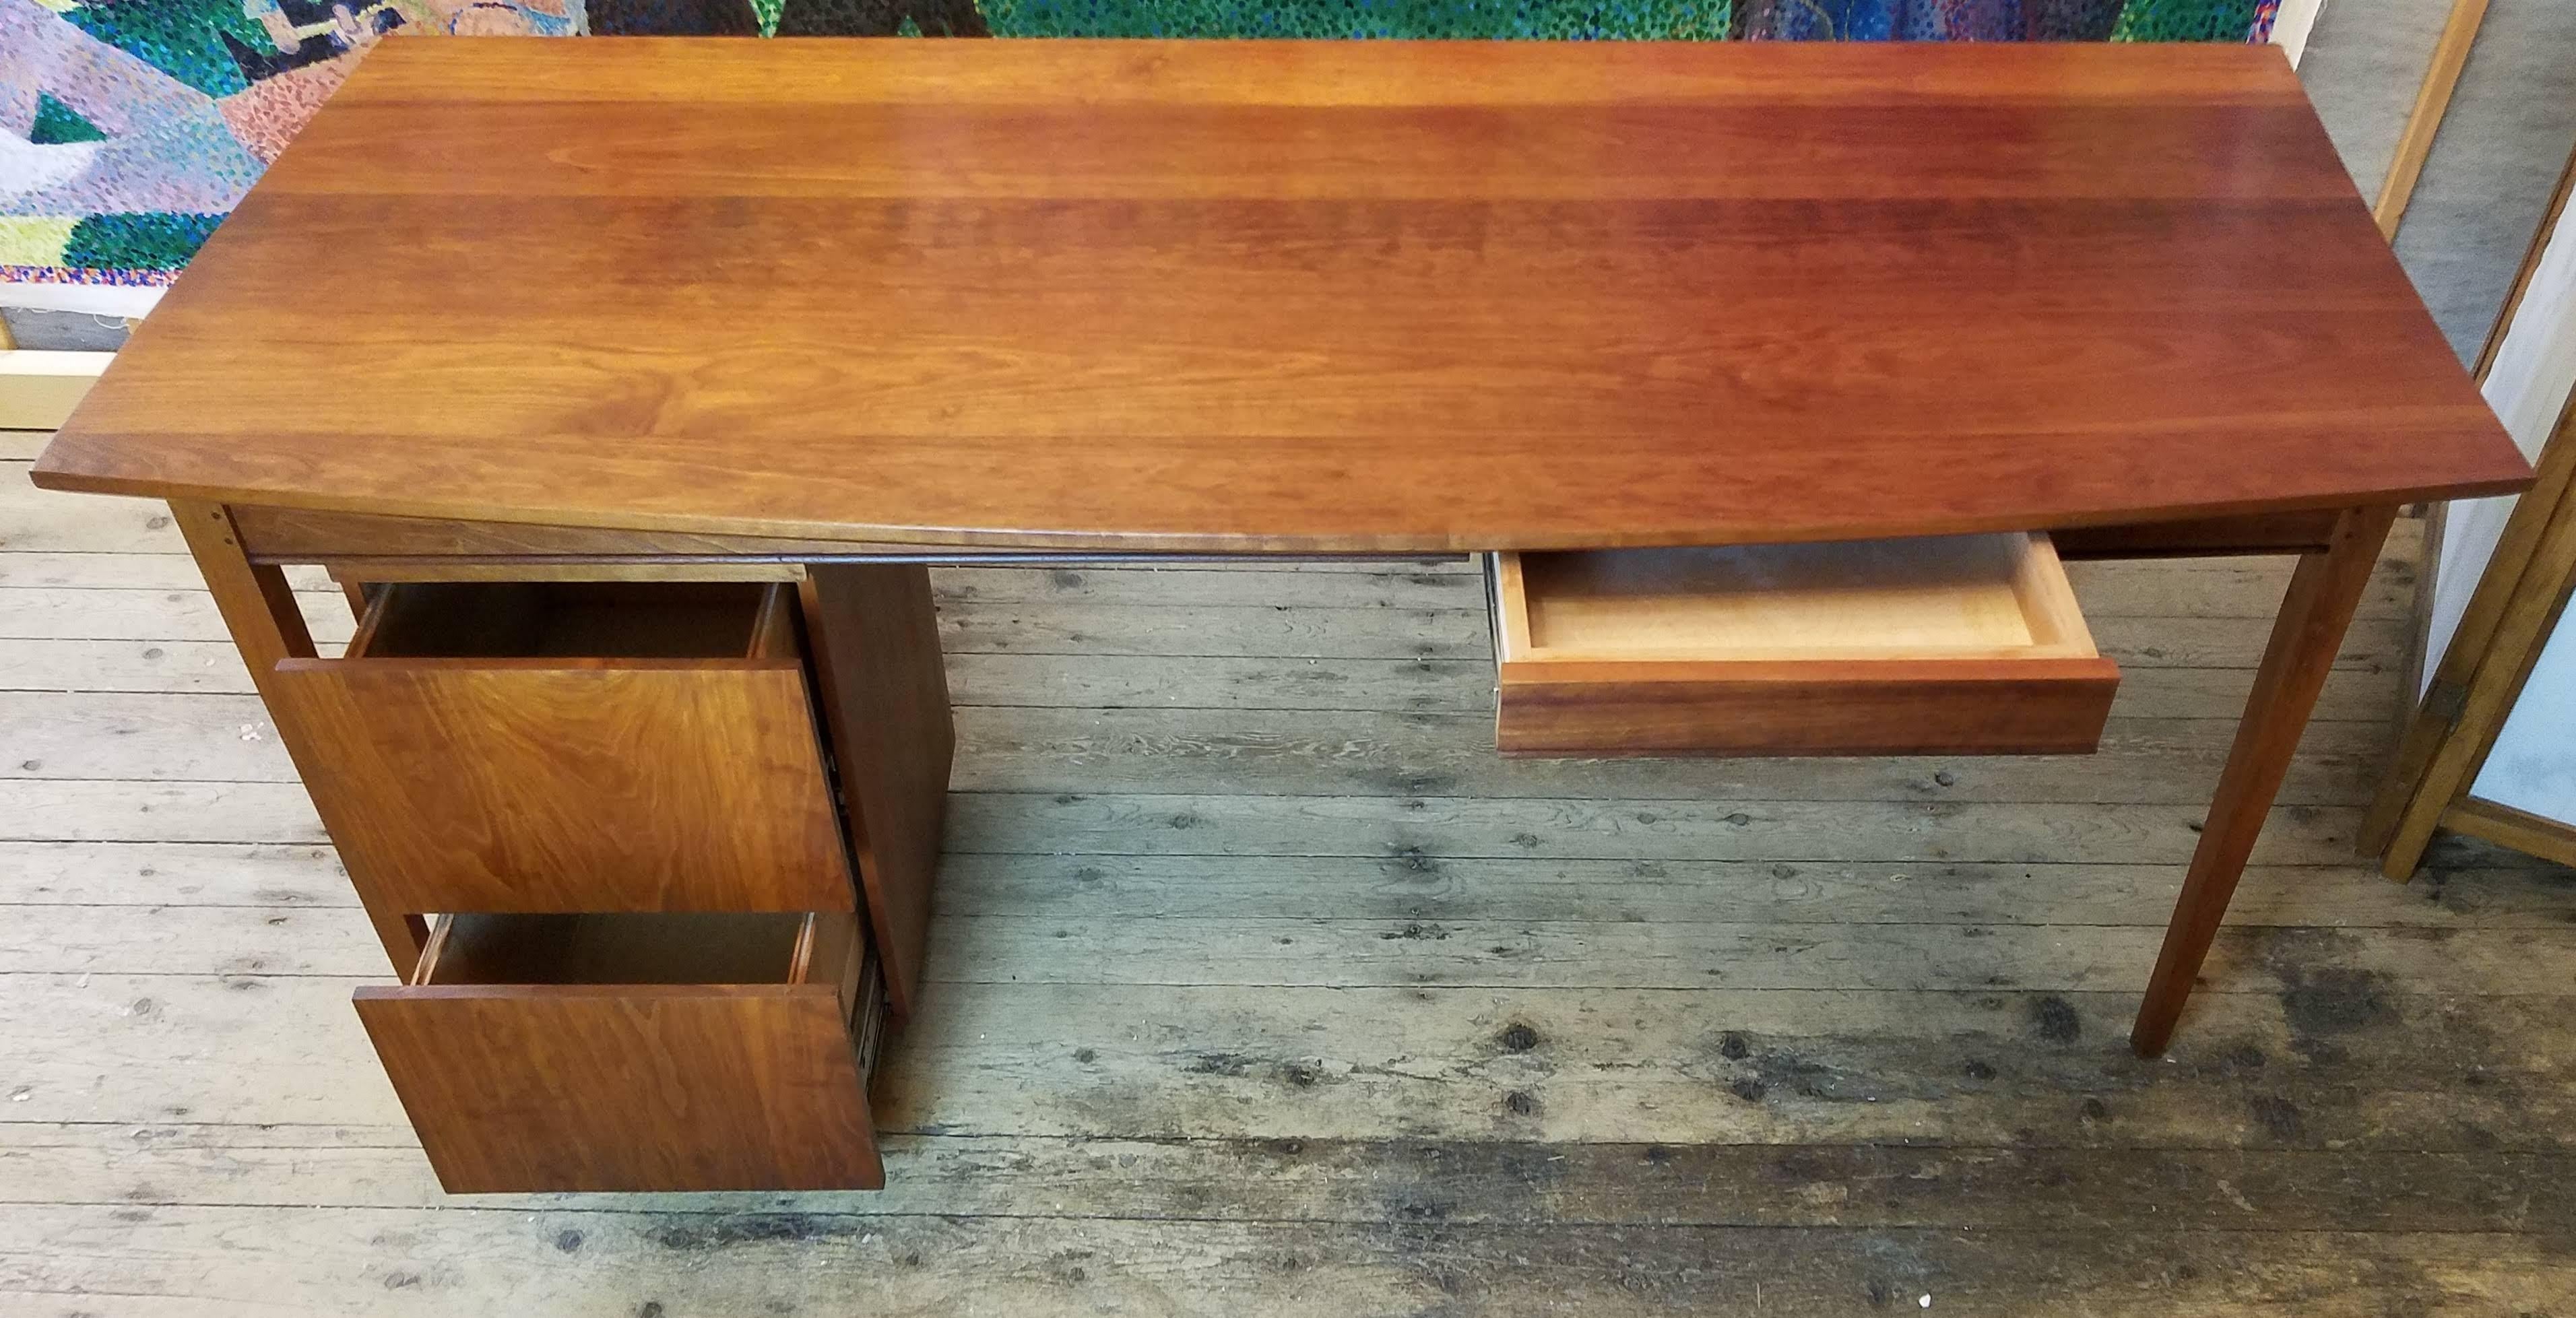 Bowed Front Solid Cherry Desk with Suspended Drawers Maine Studio 1980s For Sale 7